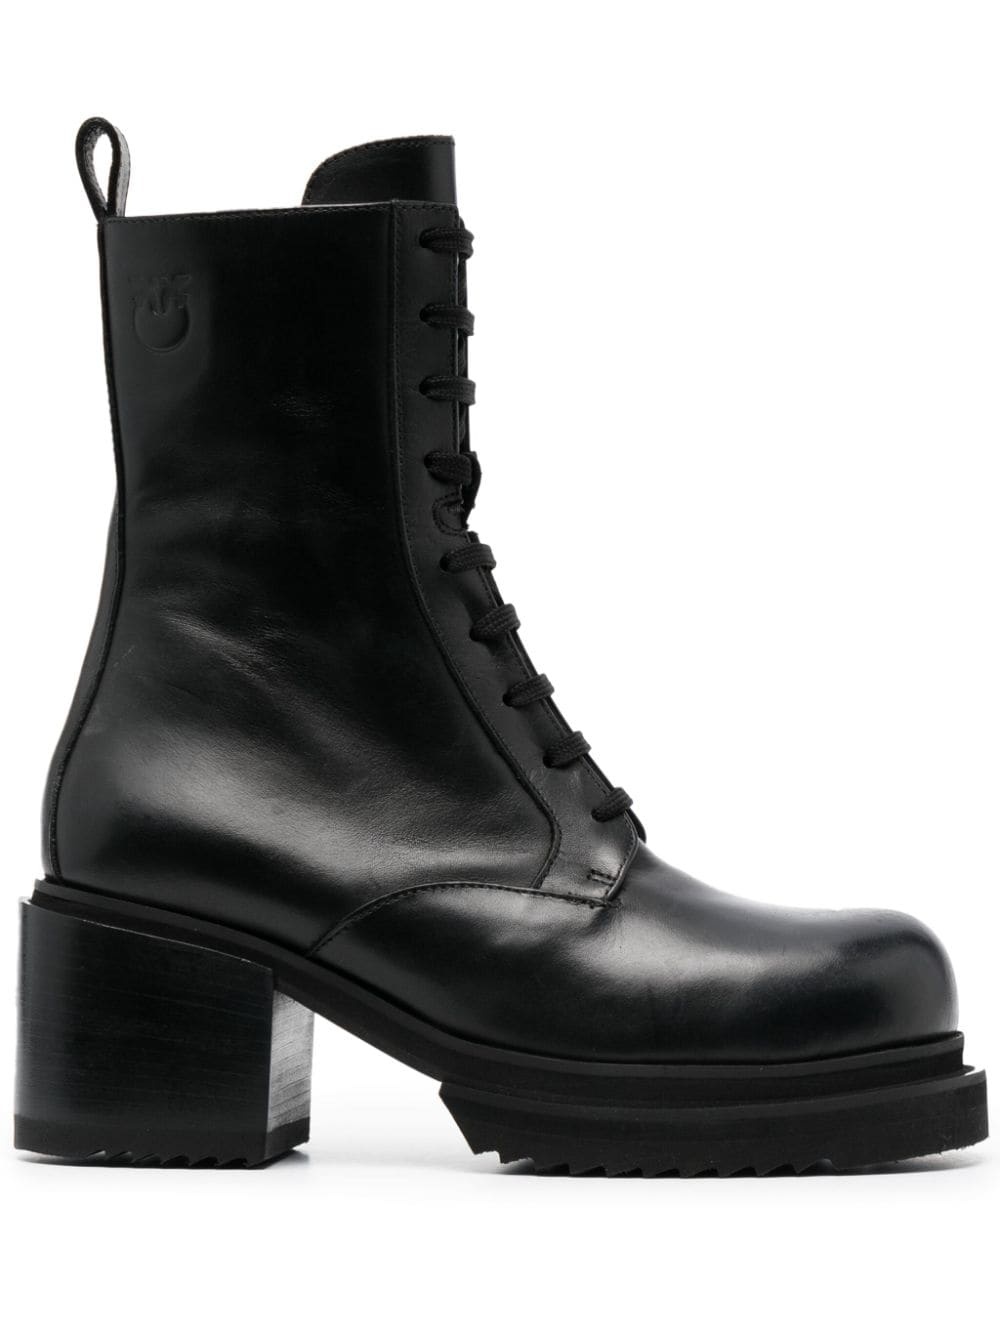 70mm leather combat boots - 1